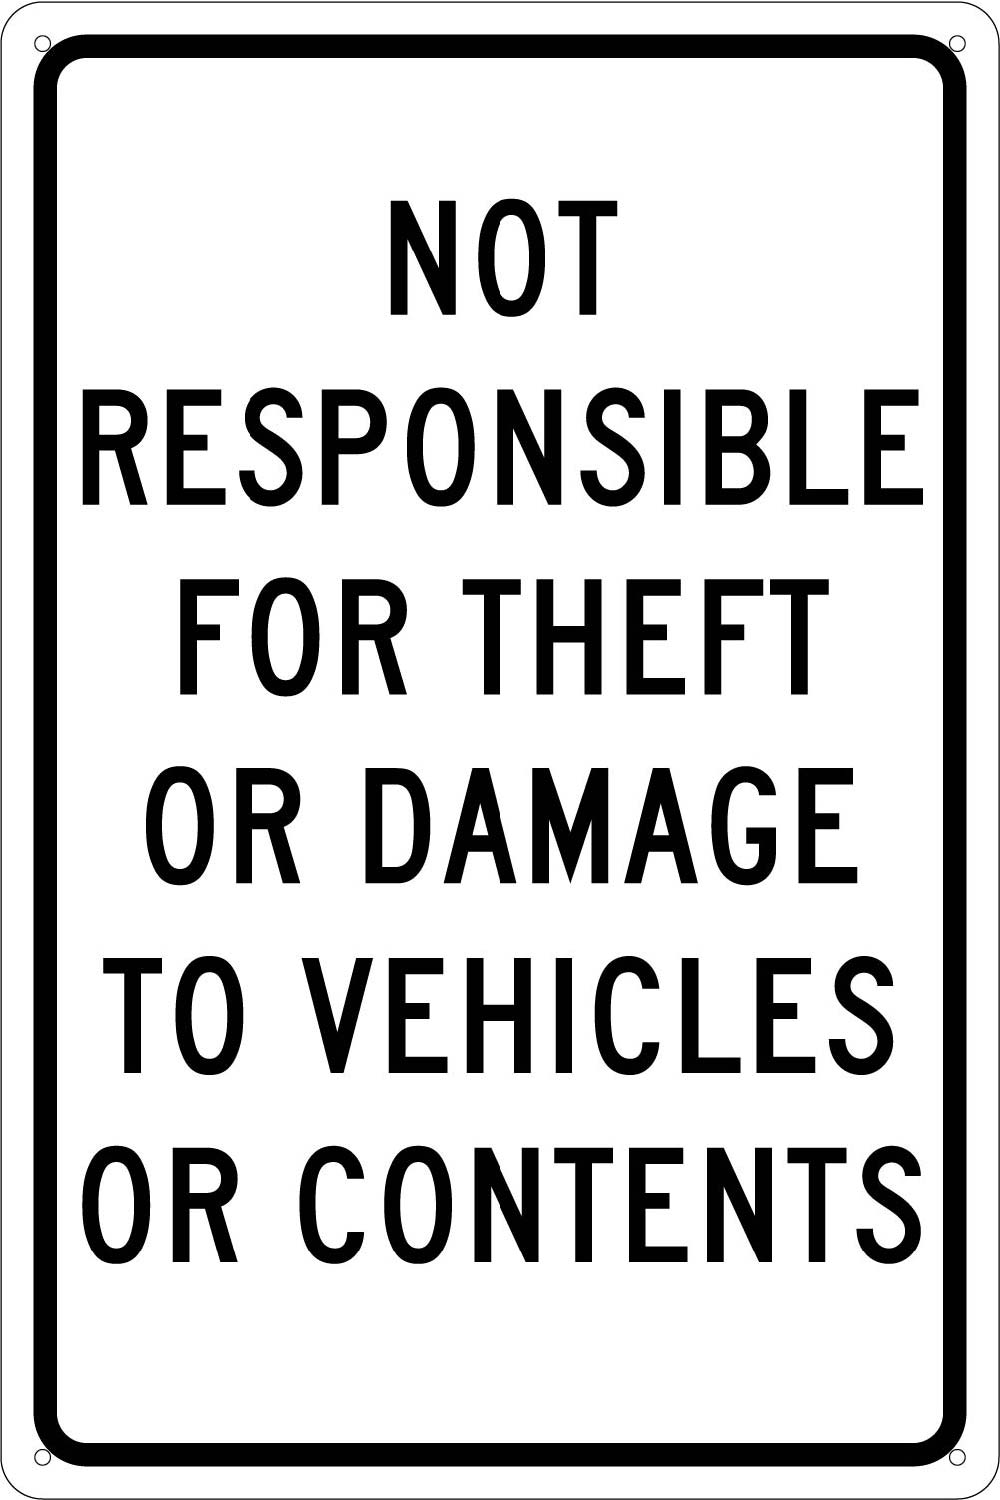 Not Responsible For Theft Or Damage To Vehicles Or Contents Sign-eSafety Supplies, Inc